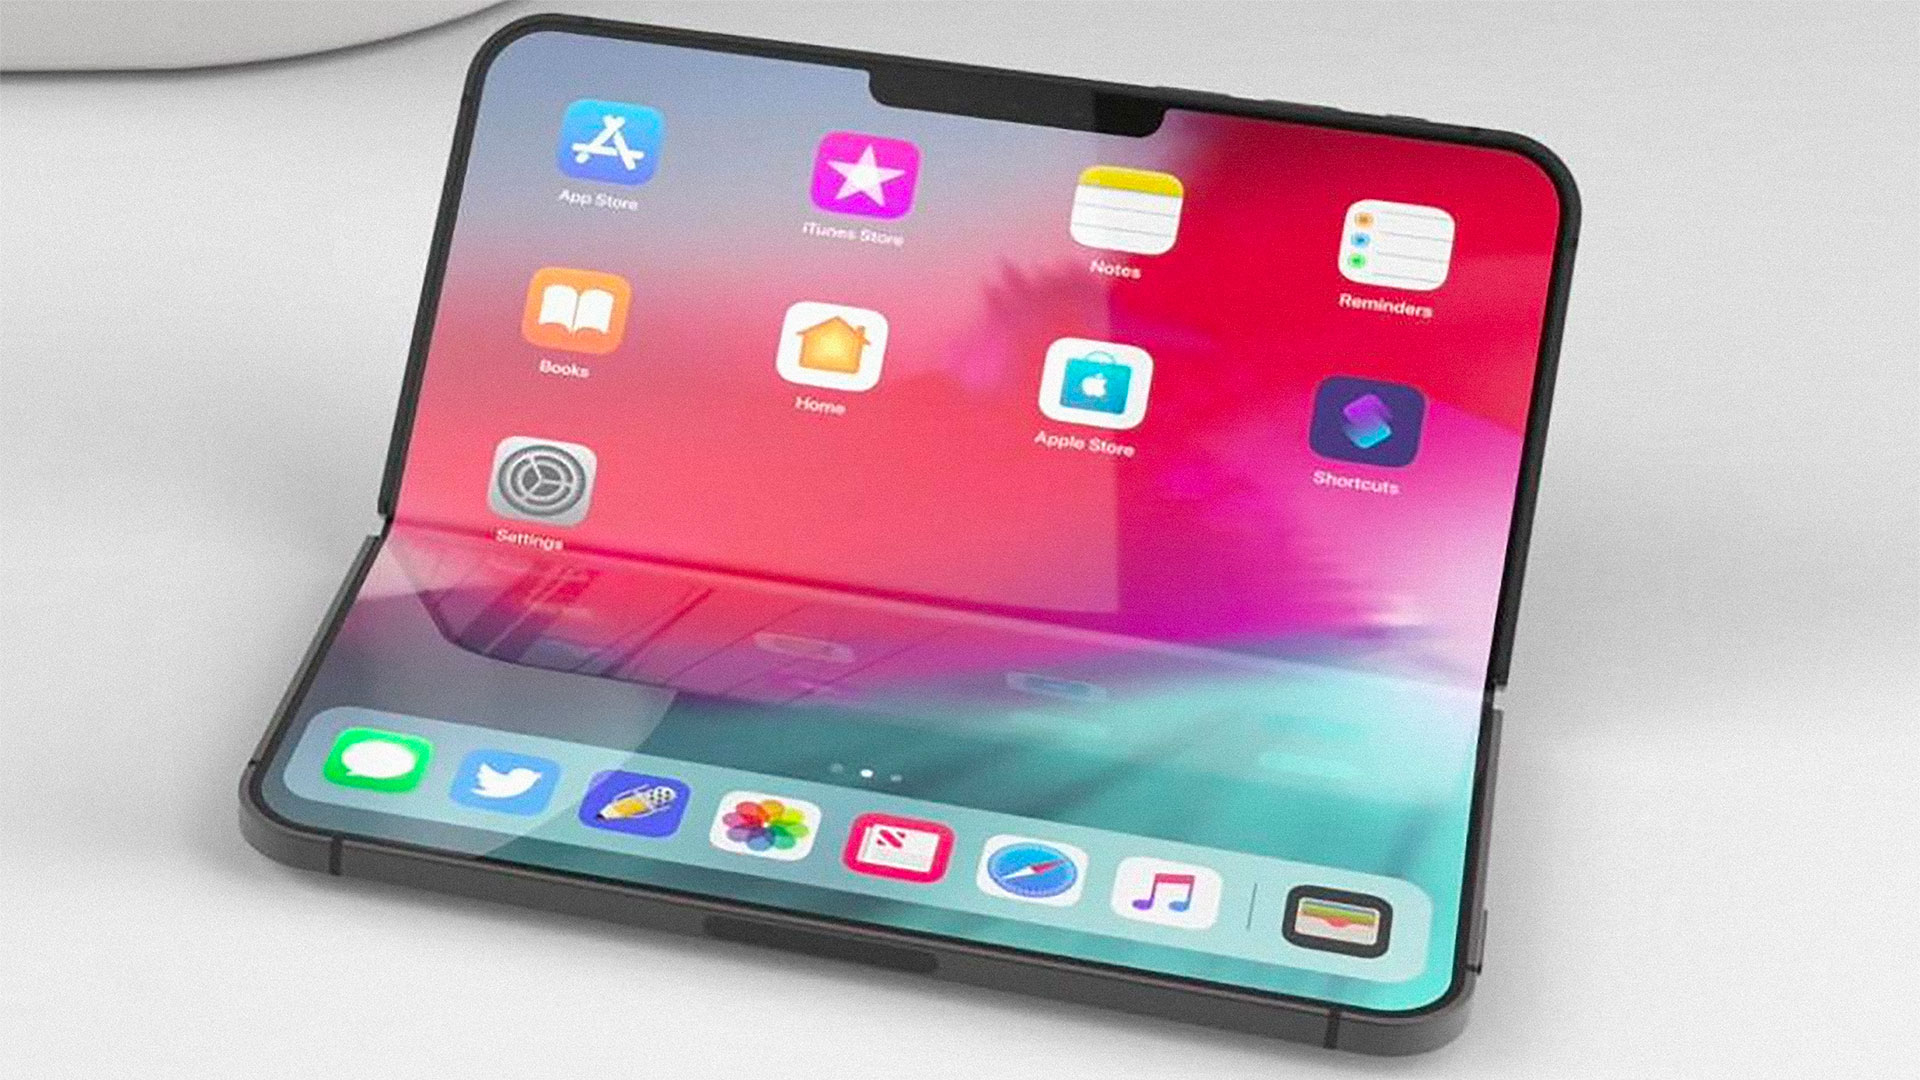 Apple's folding iPhone is coming… but will it ever take off? Creative